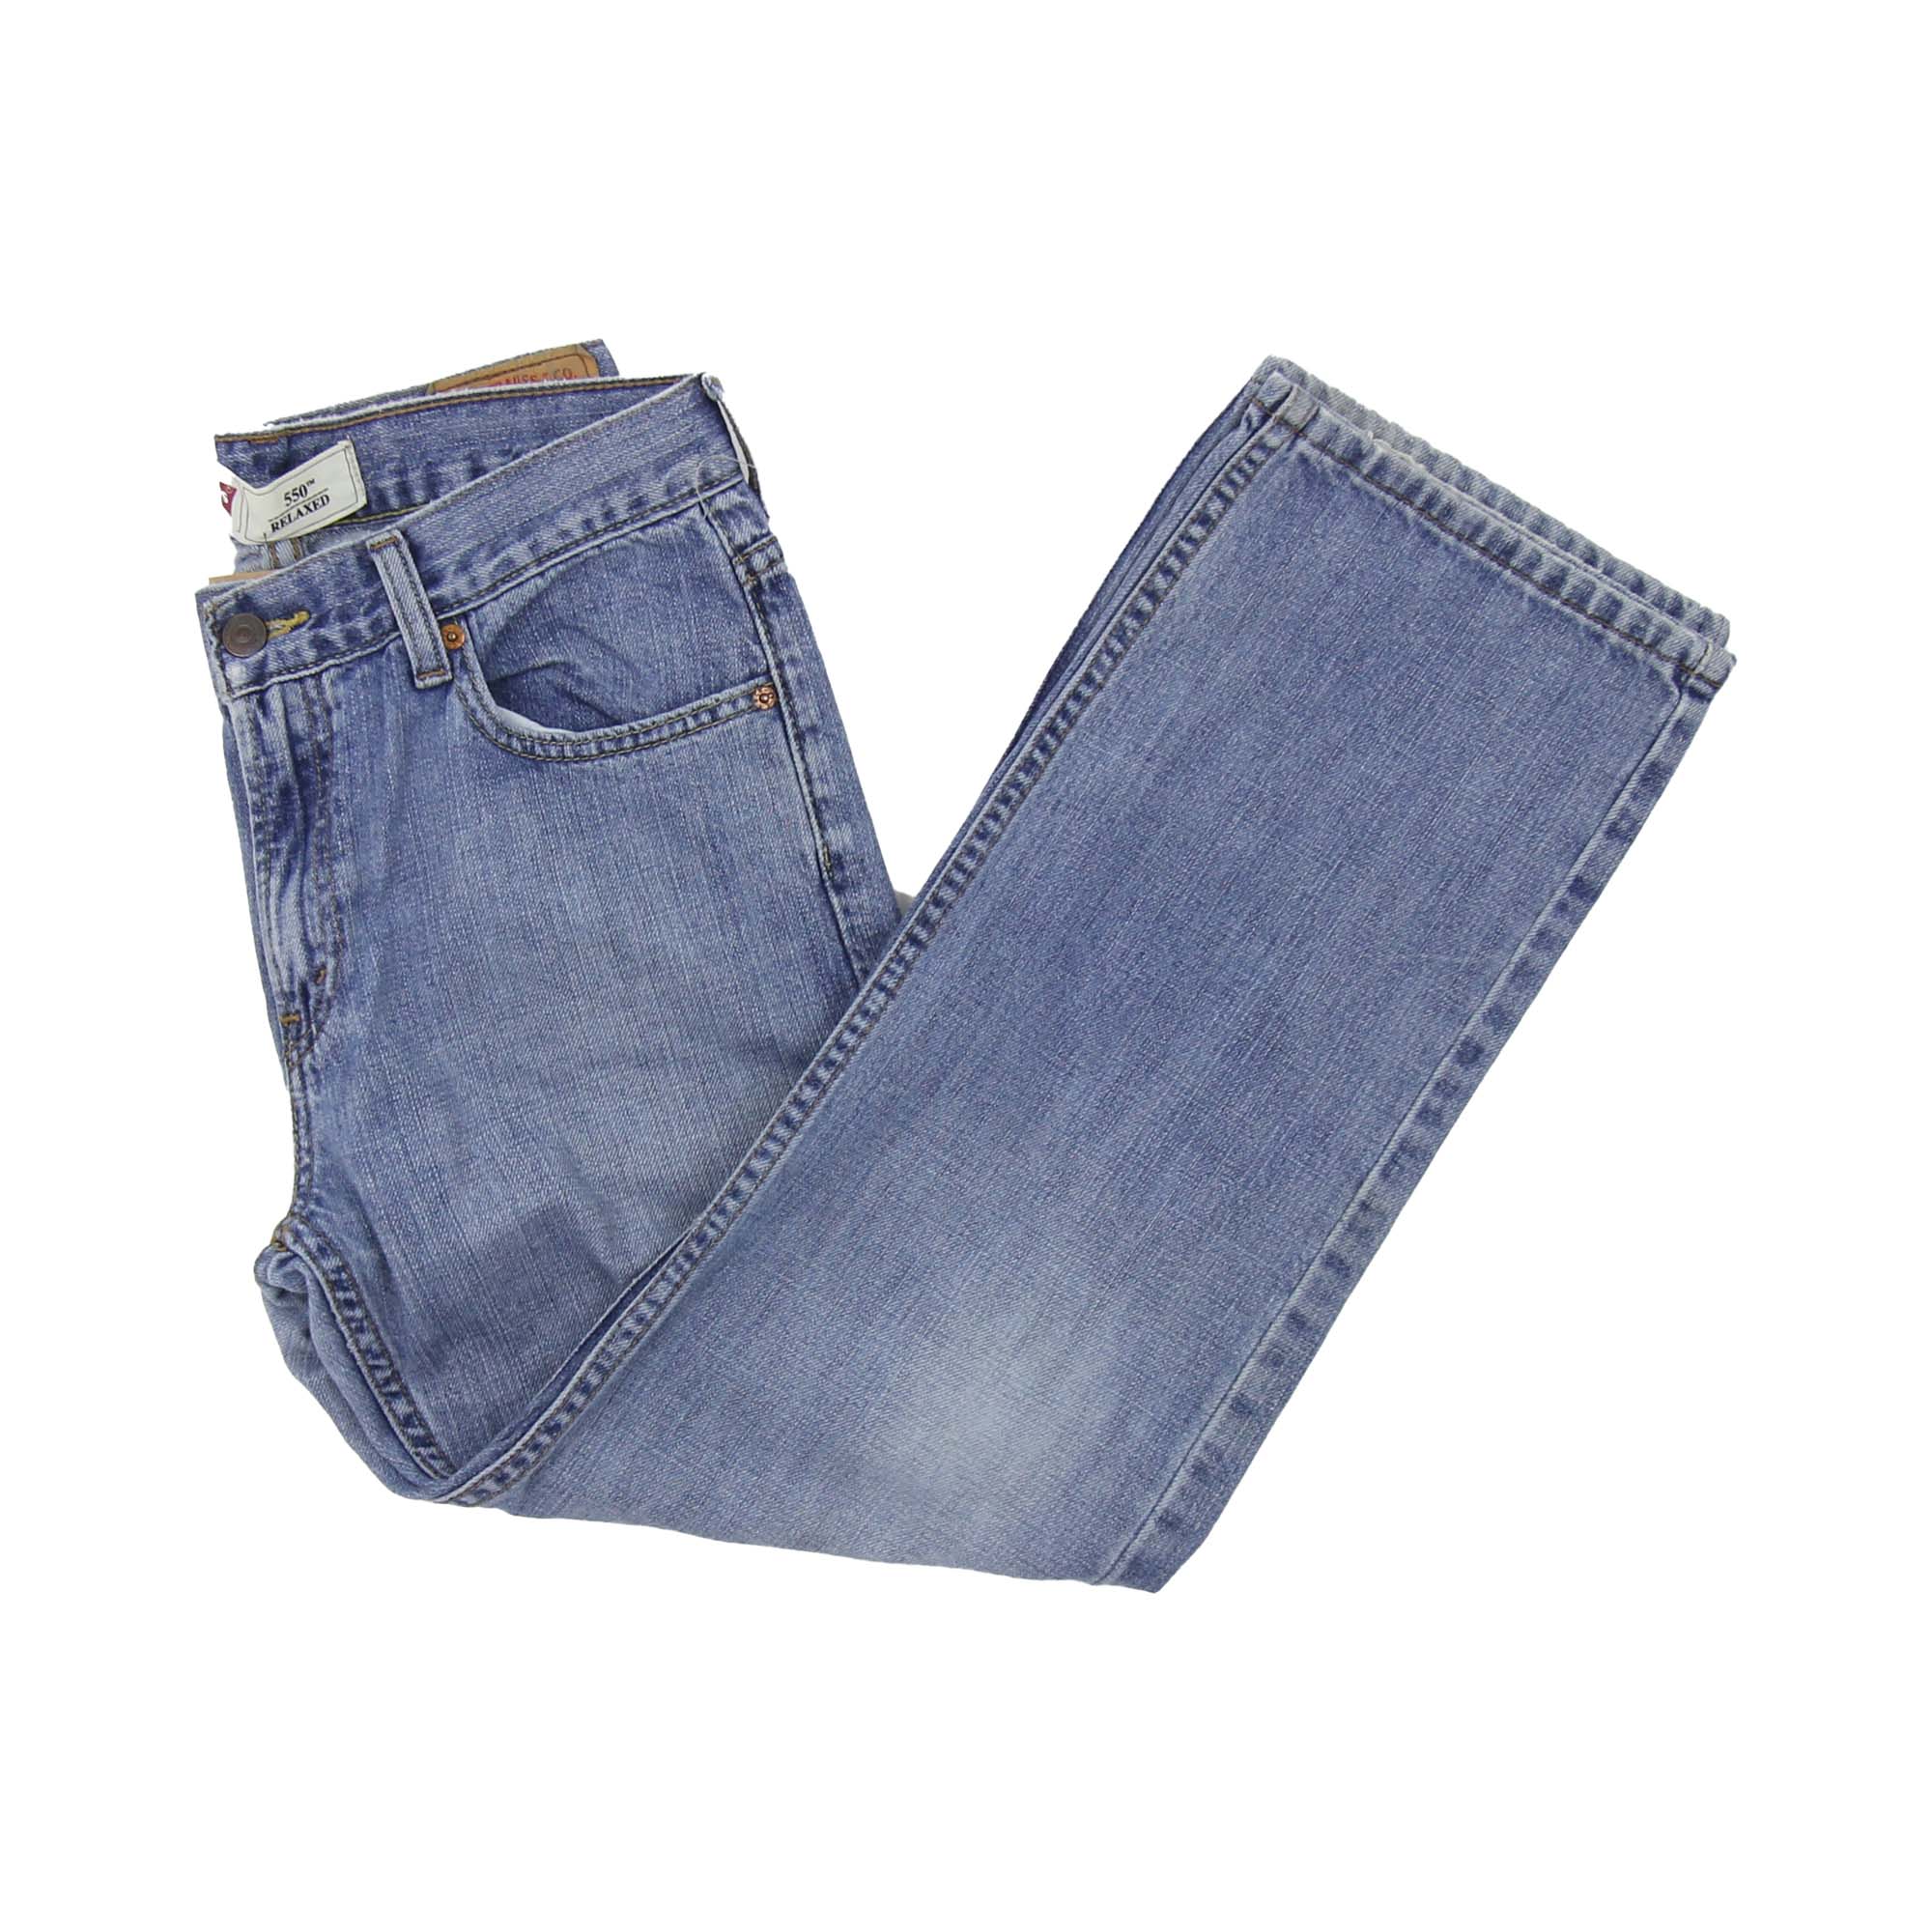 Levi's 550 Relaxed Jeans  -   W32 L27